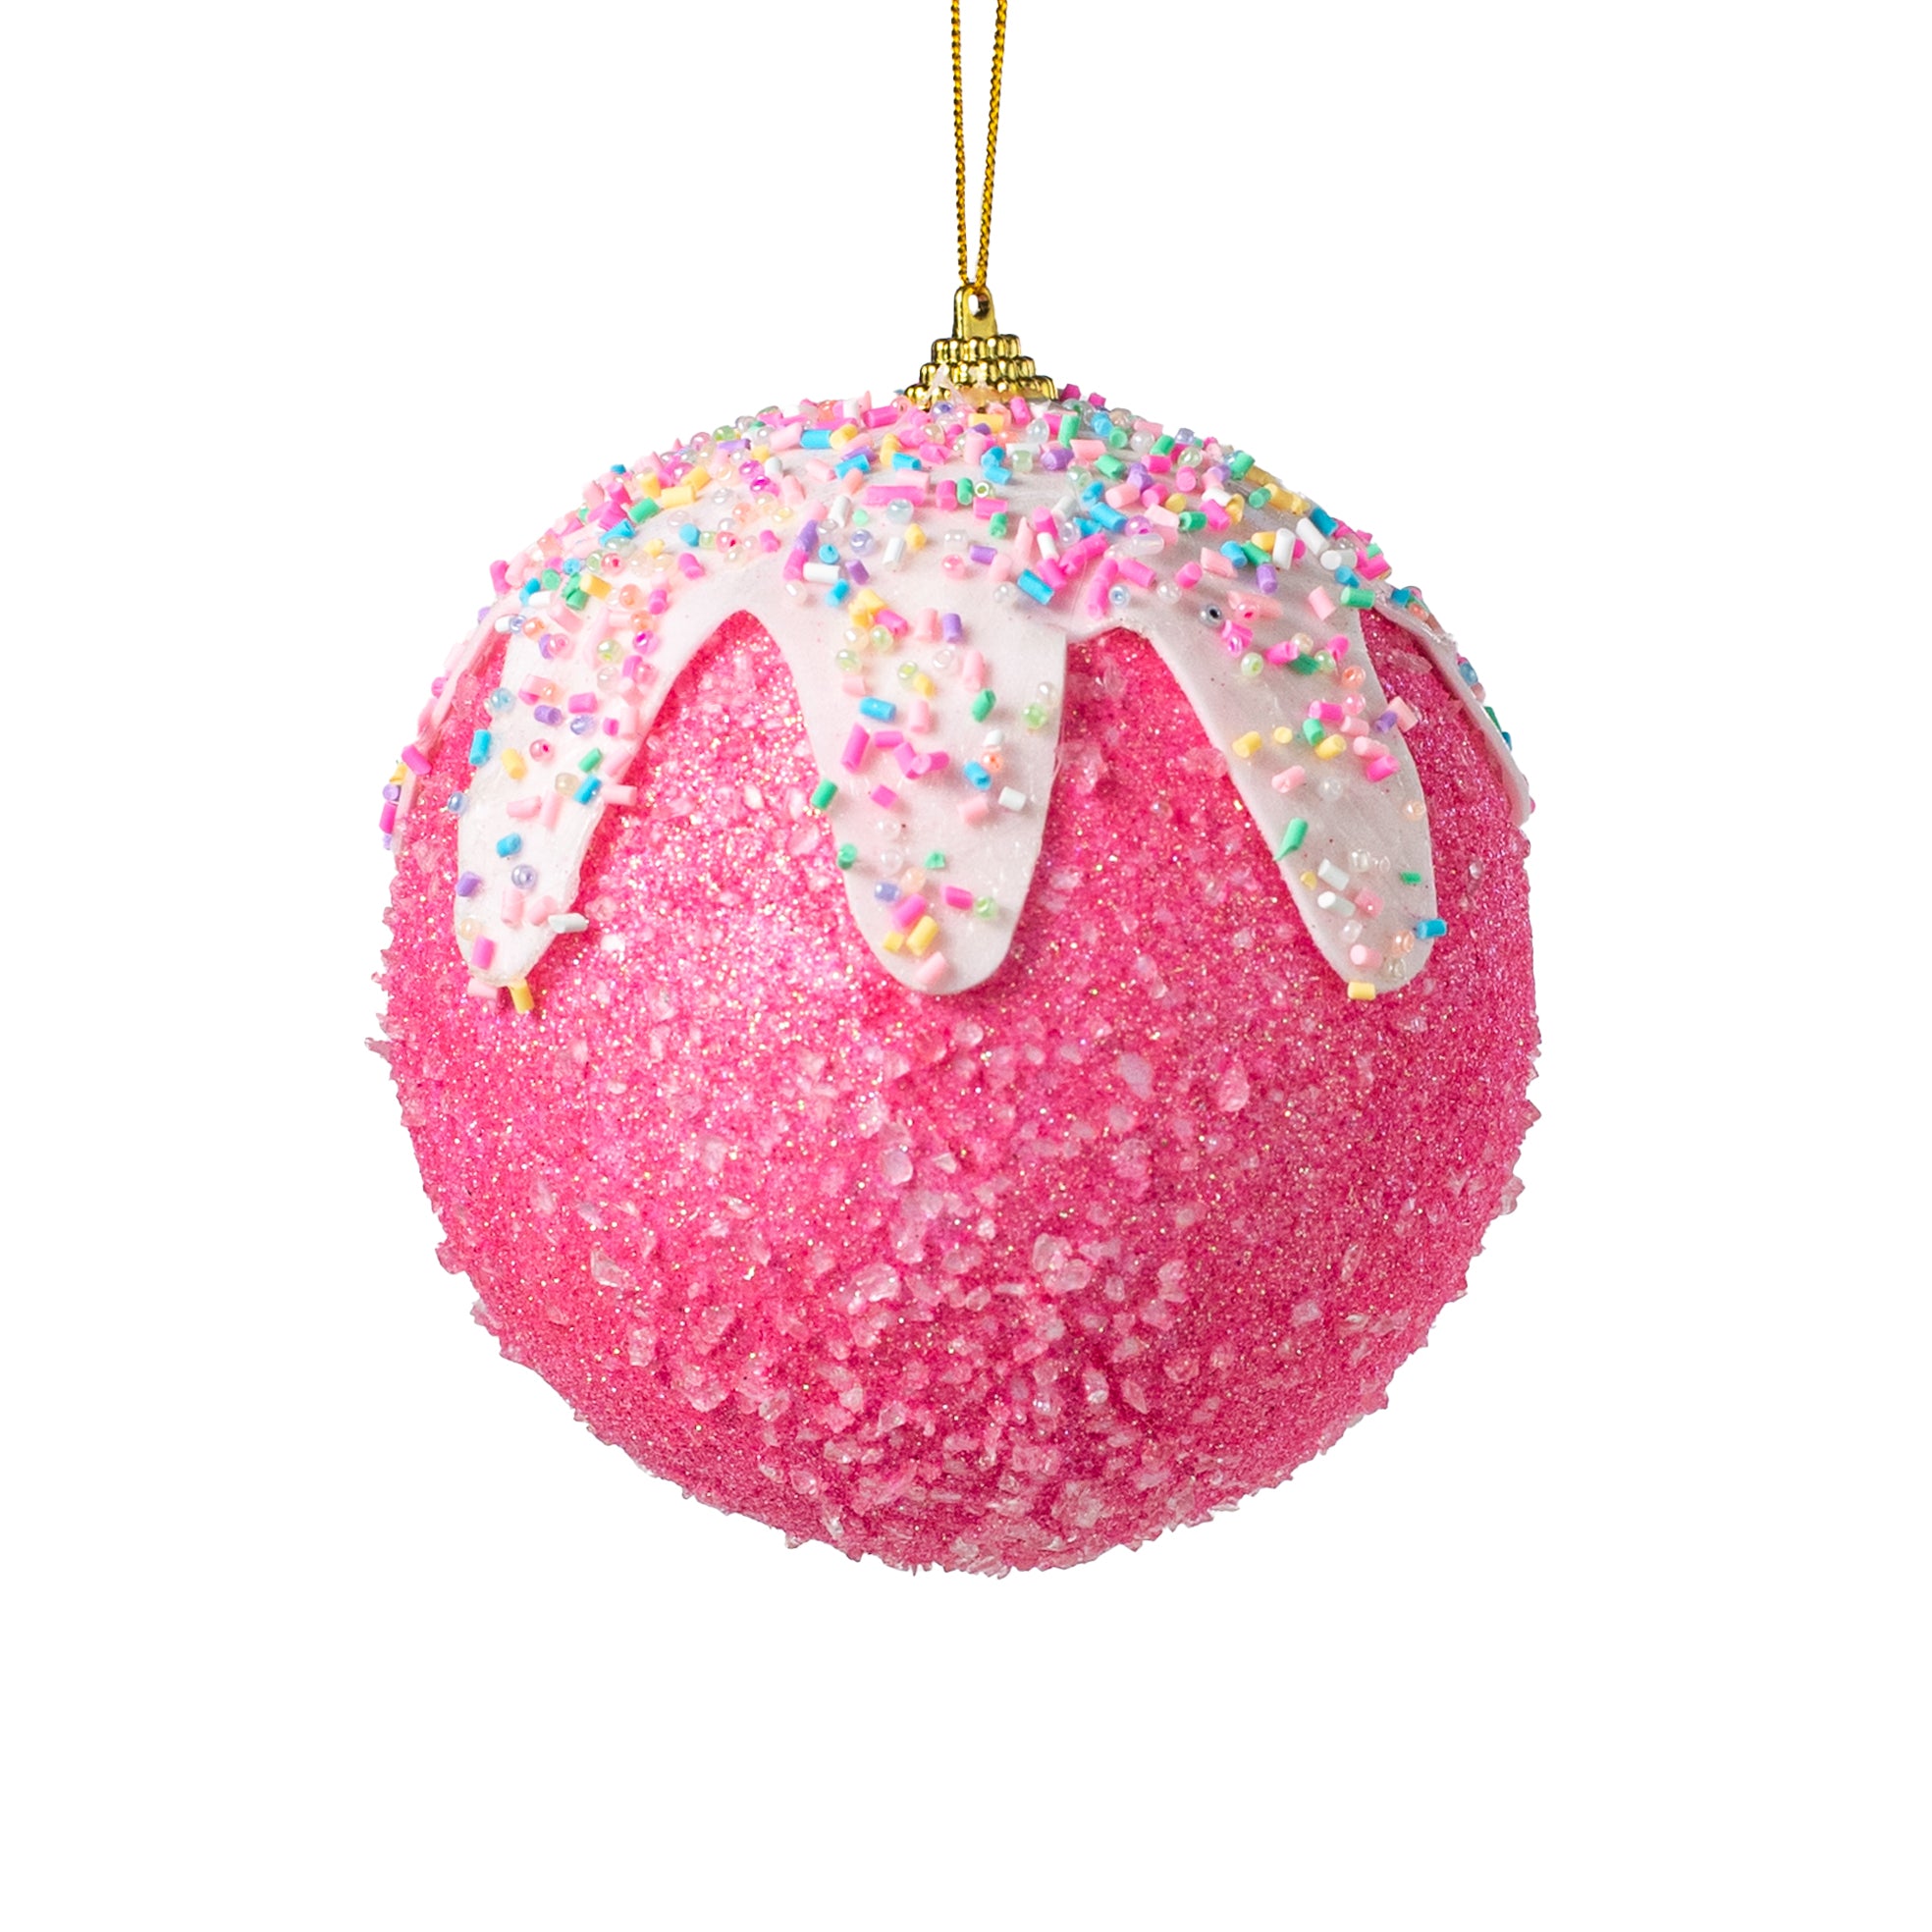 5" Sprinkles & Dipped Ball Ornament: Fuchsia Pink